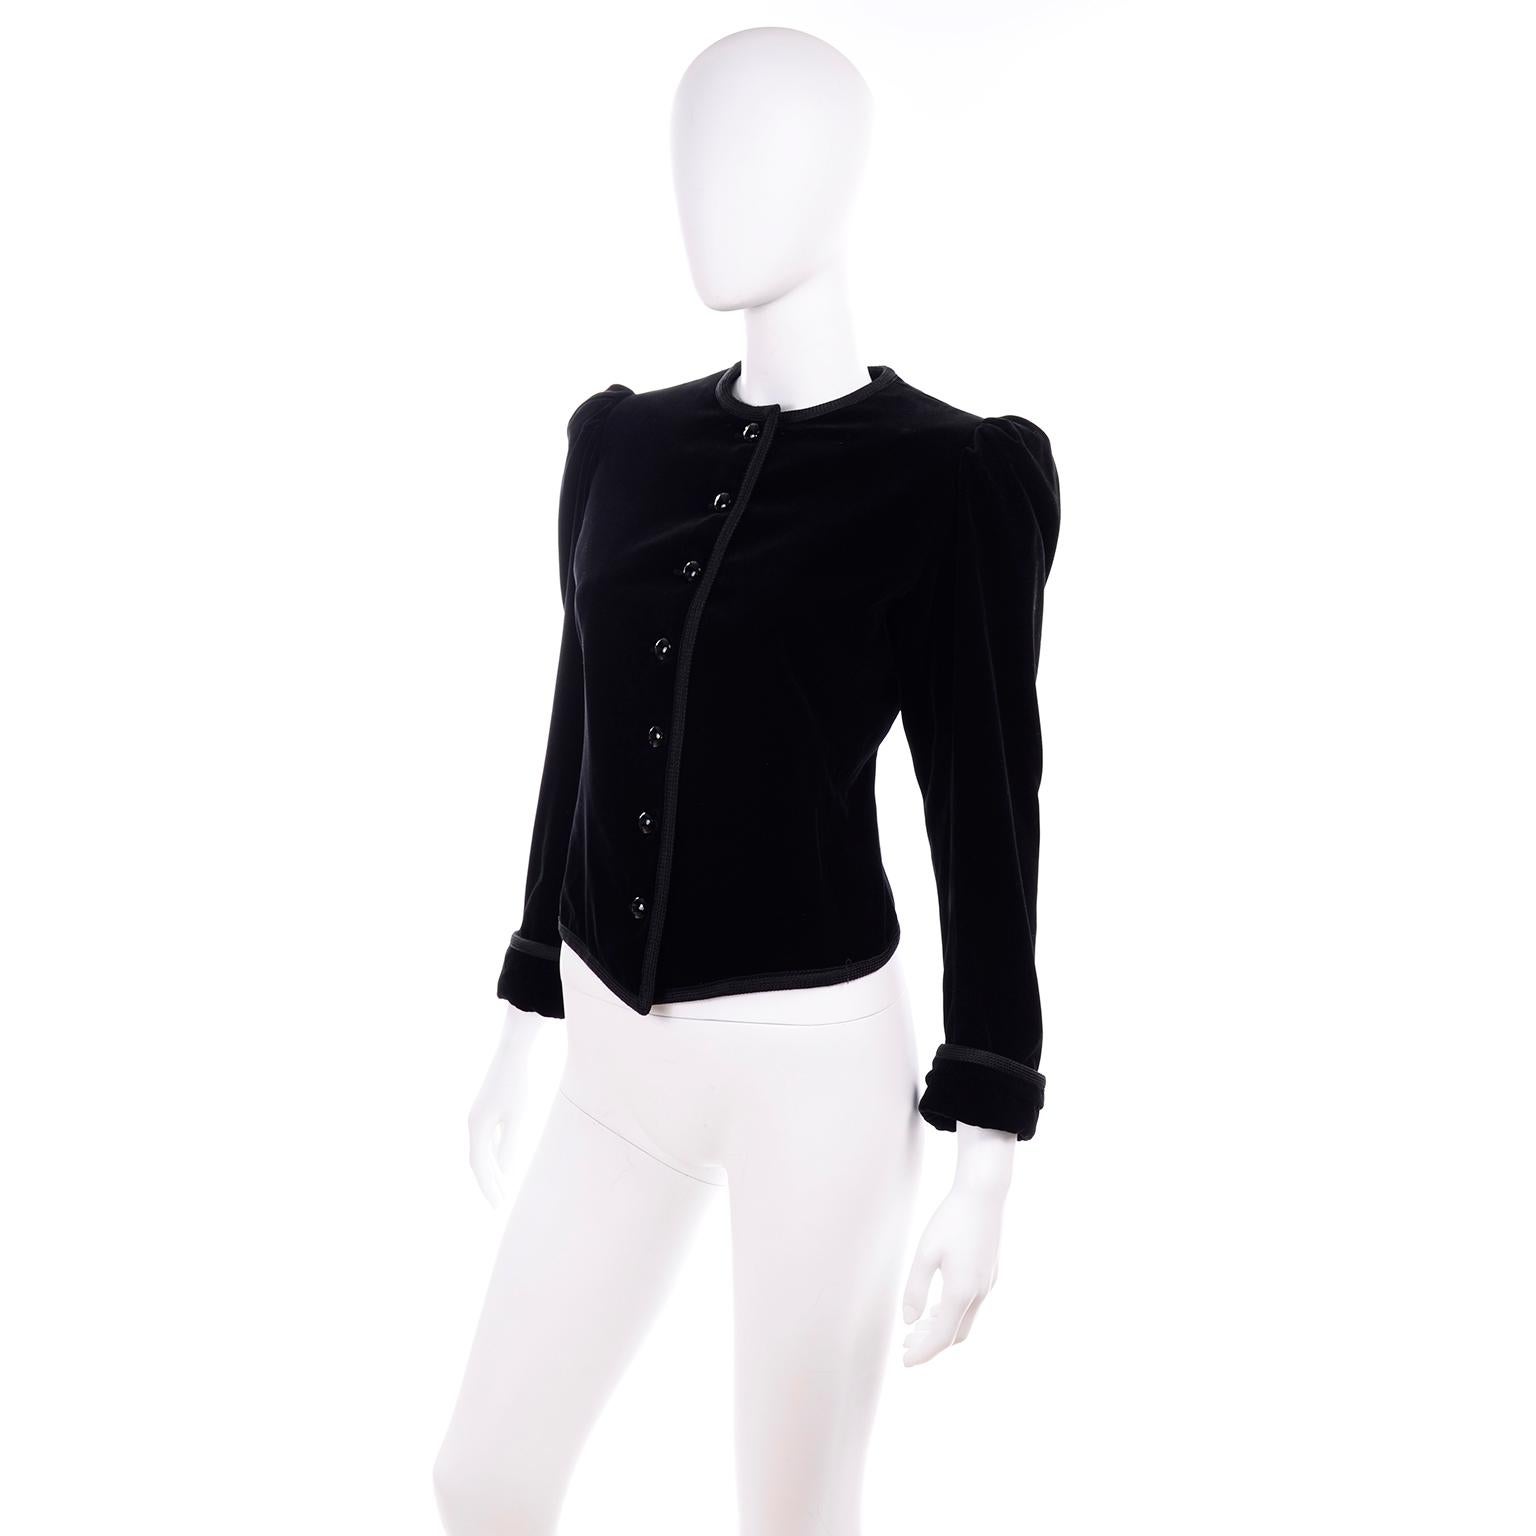 This is a timeless vintage black velvet jacket designed by Yves Saint Laurent in the late 1970's. There are gentle shoulder pads and pleated shoulders to create puff sleeves and the jacket has Saint Laurent's signature braided trim, round buttons,